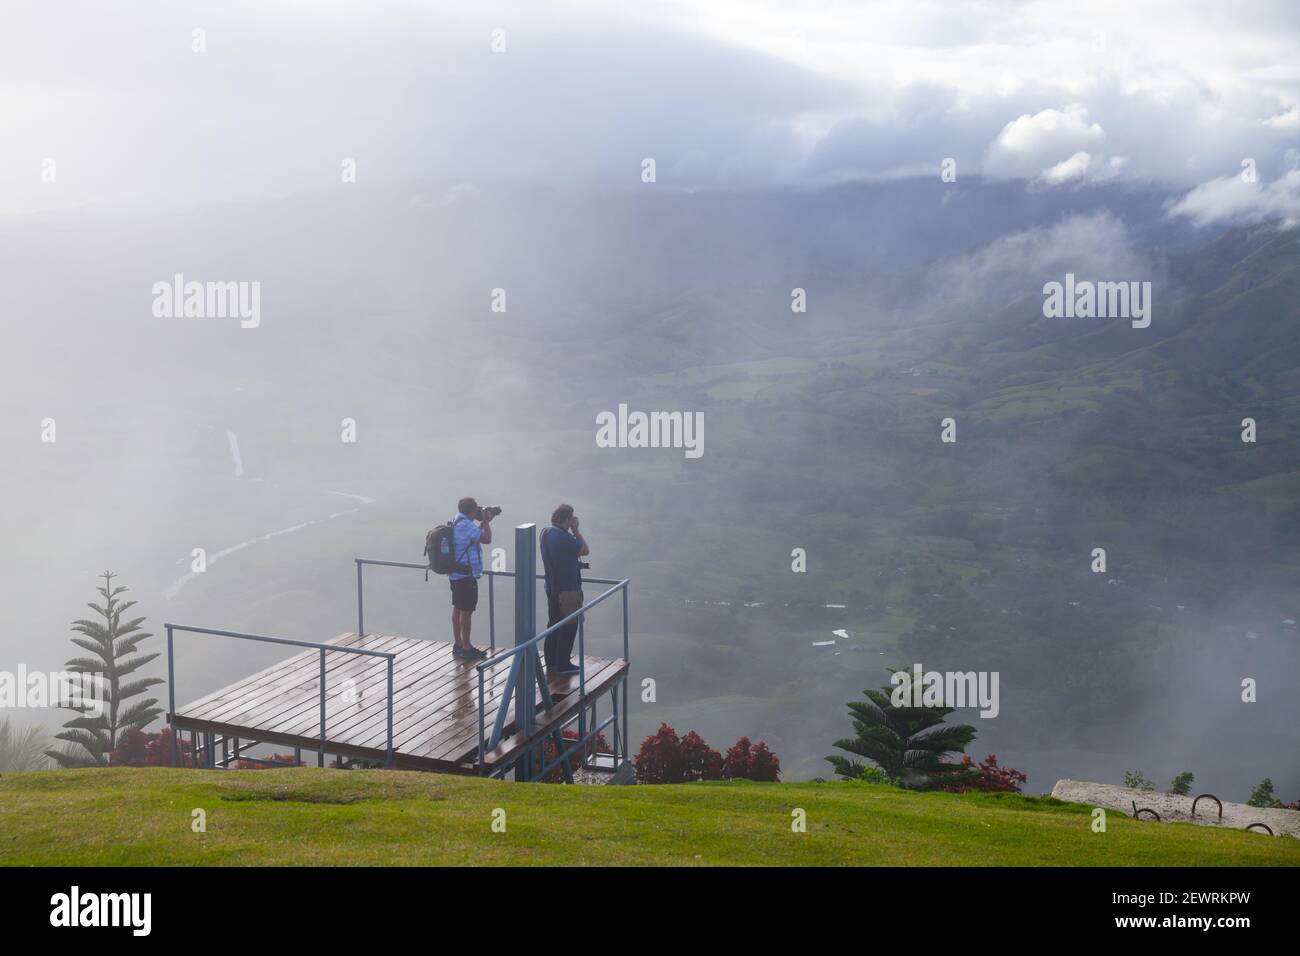 Montana Redonda, Dominican republic - January 7, 2020: Tourists taking photo with Mountain landscape on a rainy sunny morning from viewpoint of Montan Stock Photo